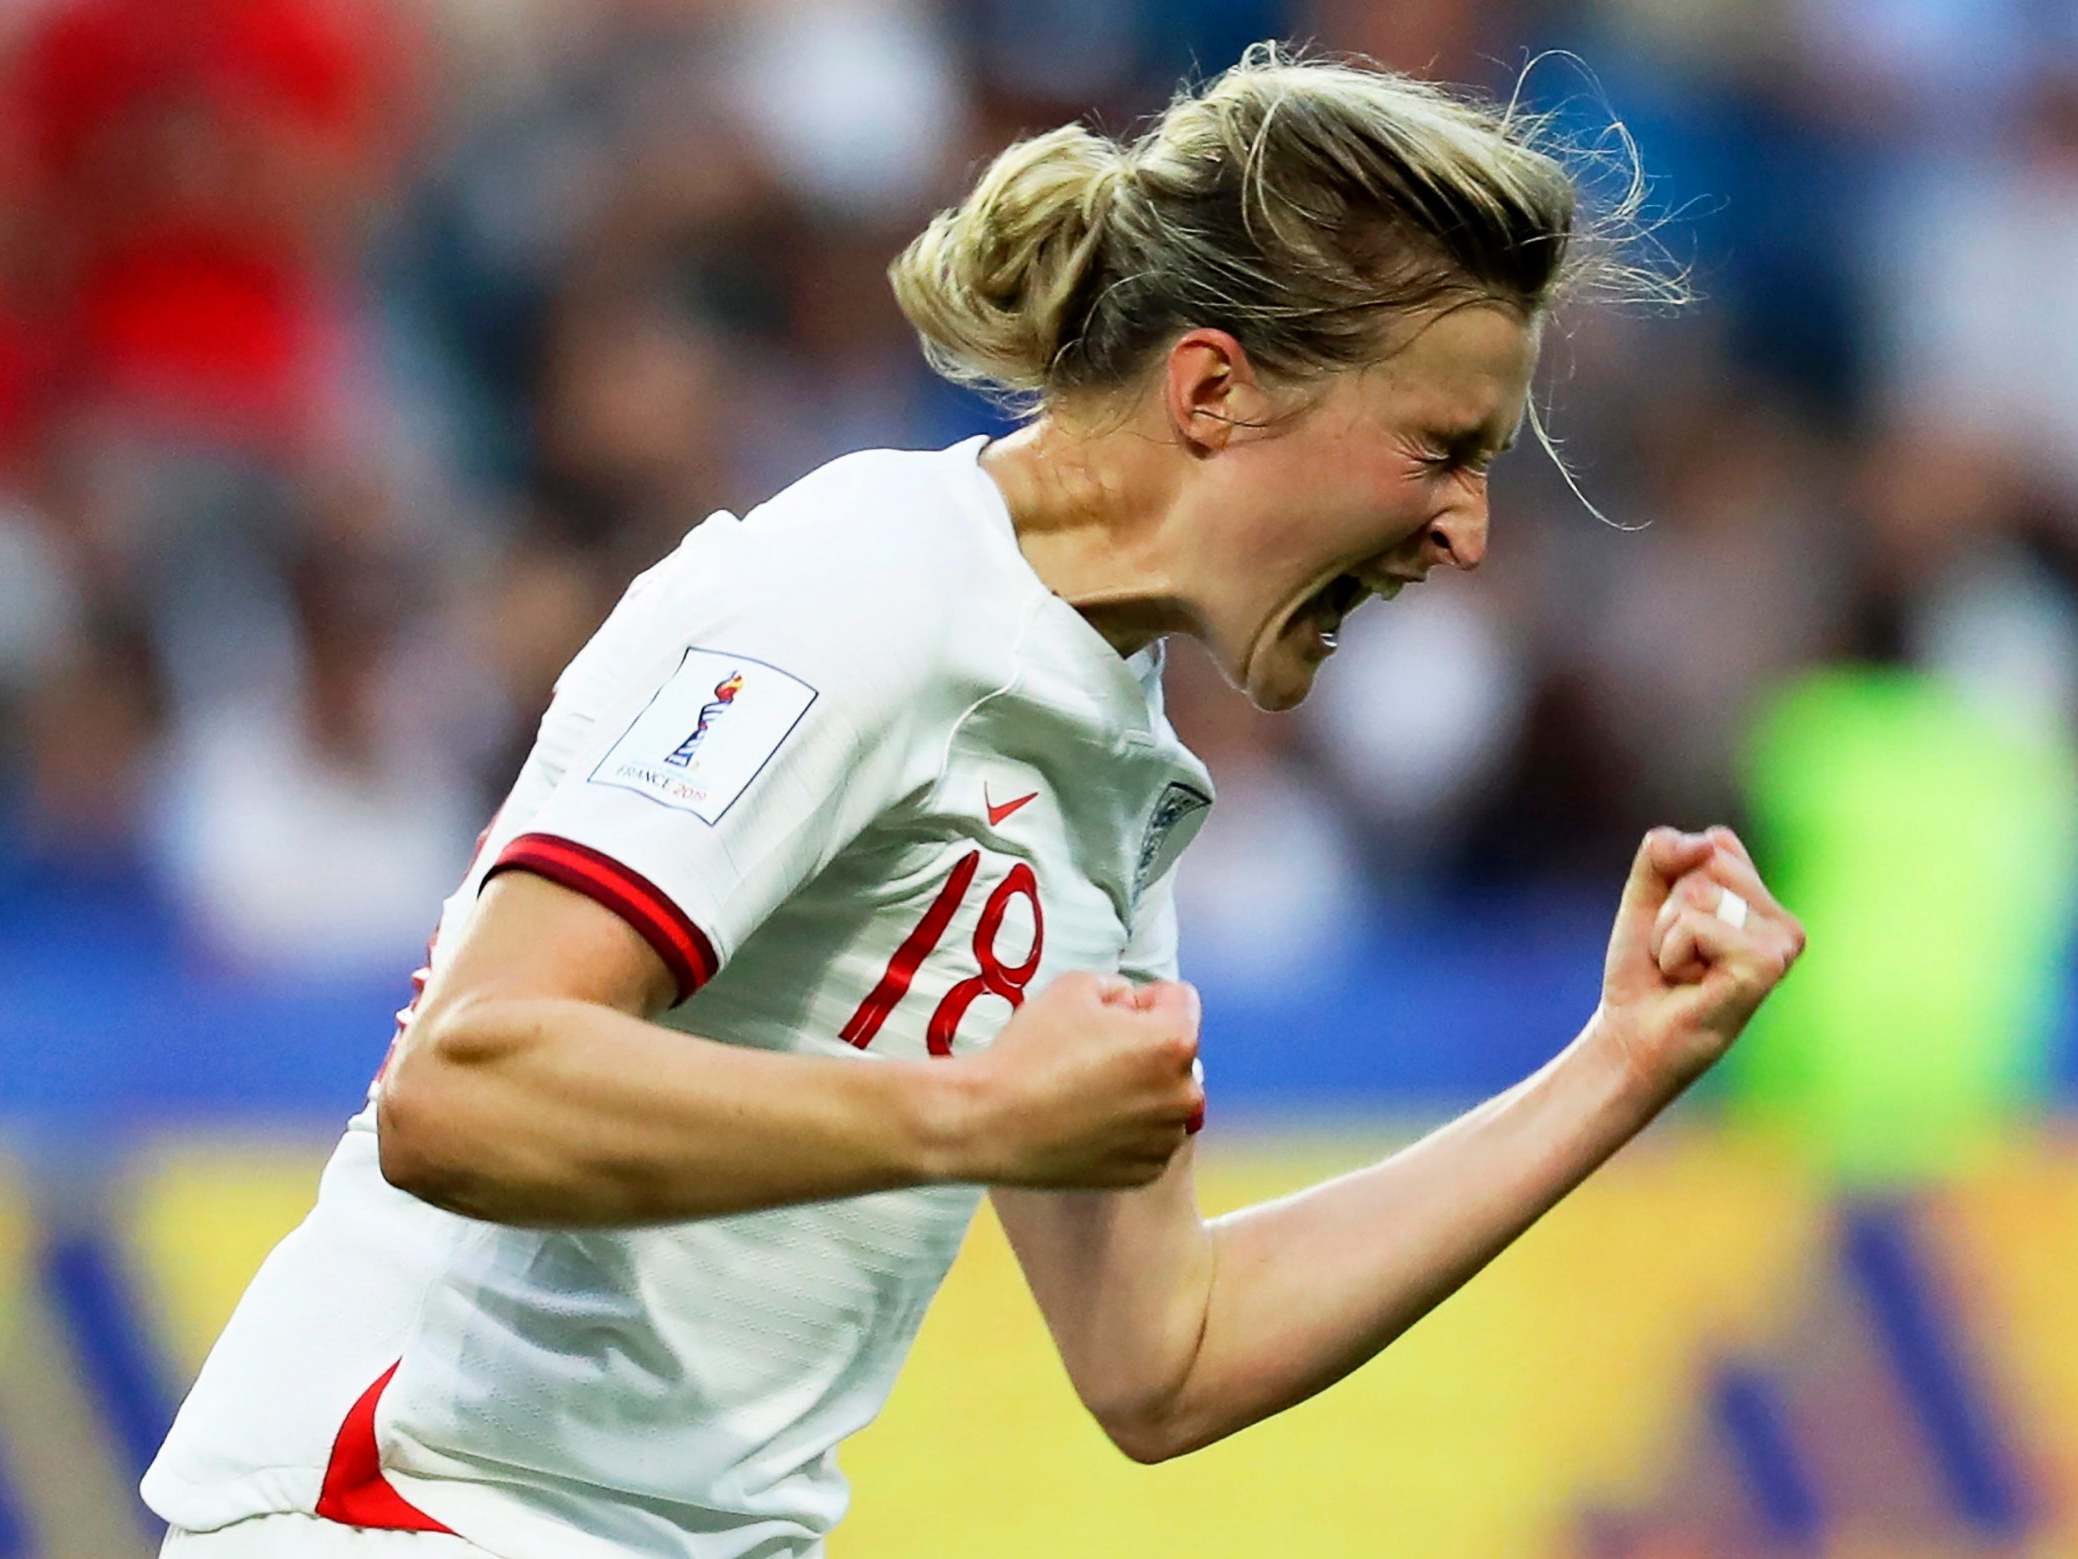 England vs Norway: Ellen White goal sees her become all-time leading scorer in Women's World Cups